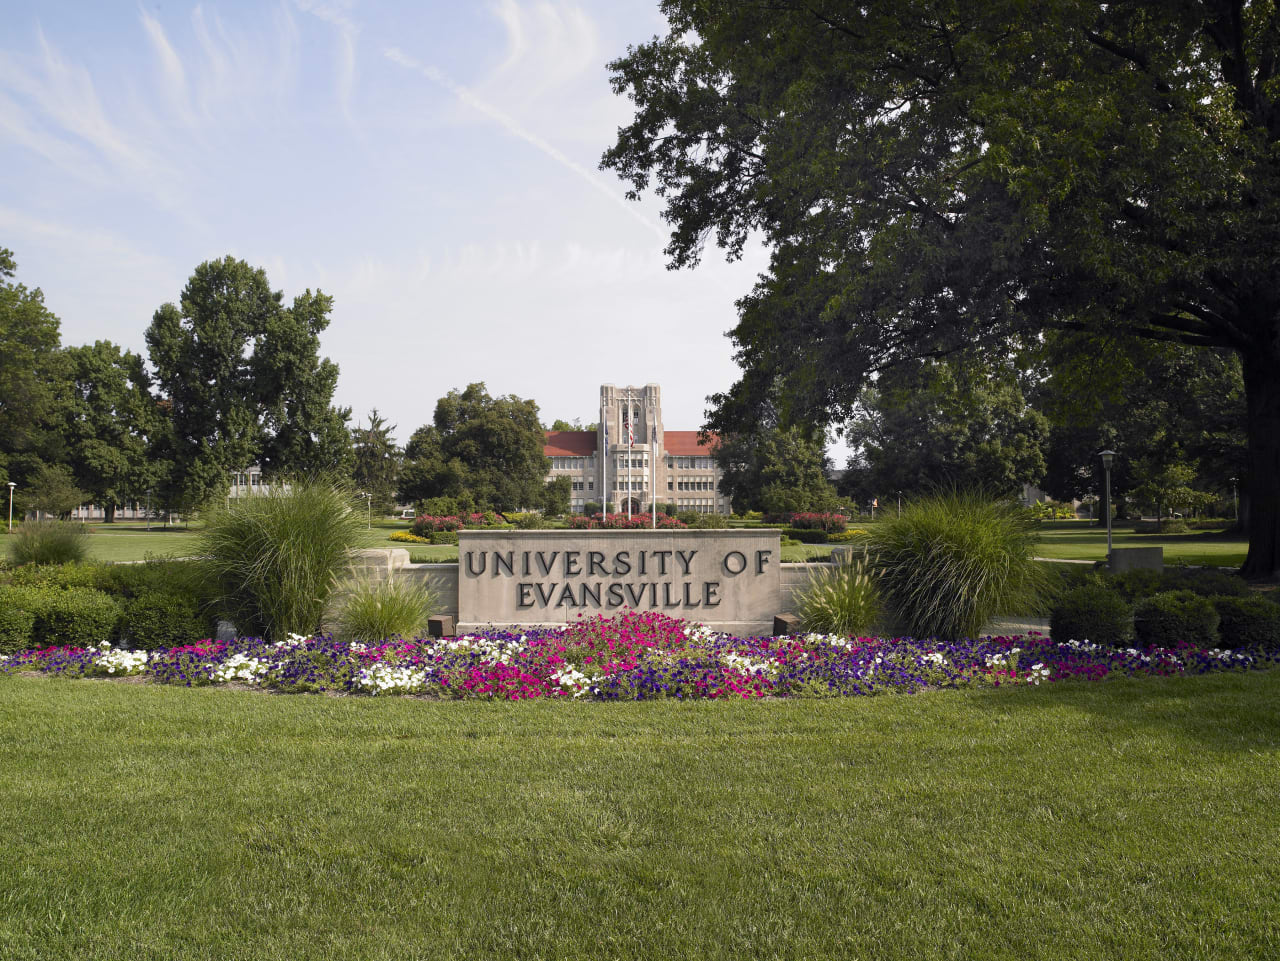 University of Evansville BSc in Business Administration, Logistics and Supply Chain Management